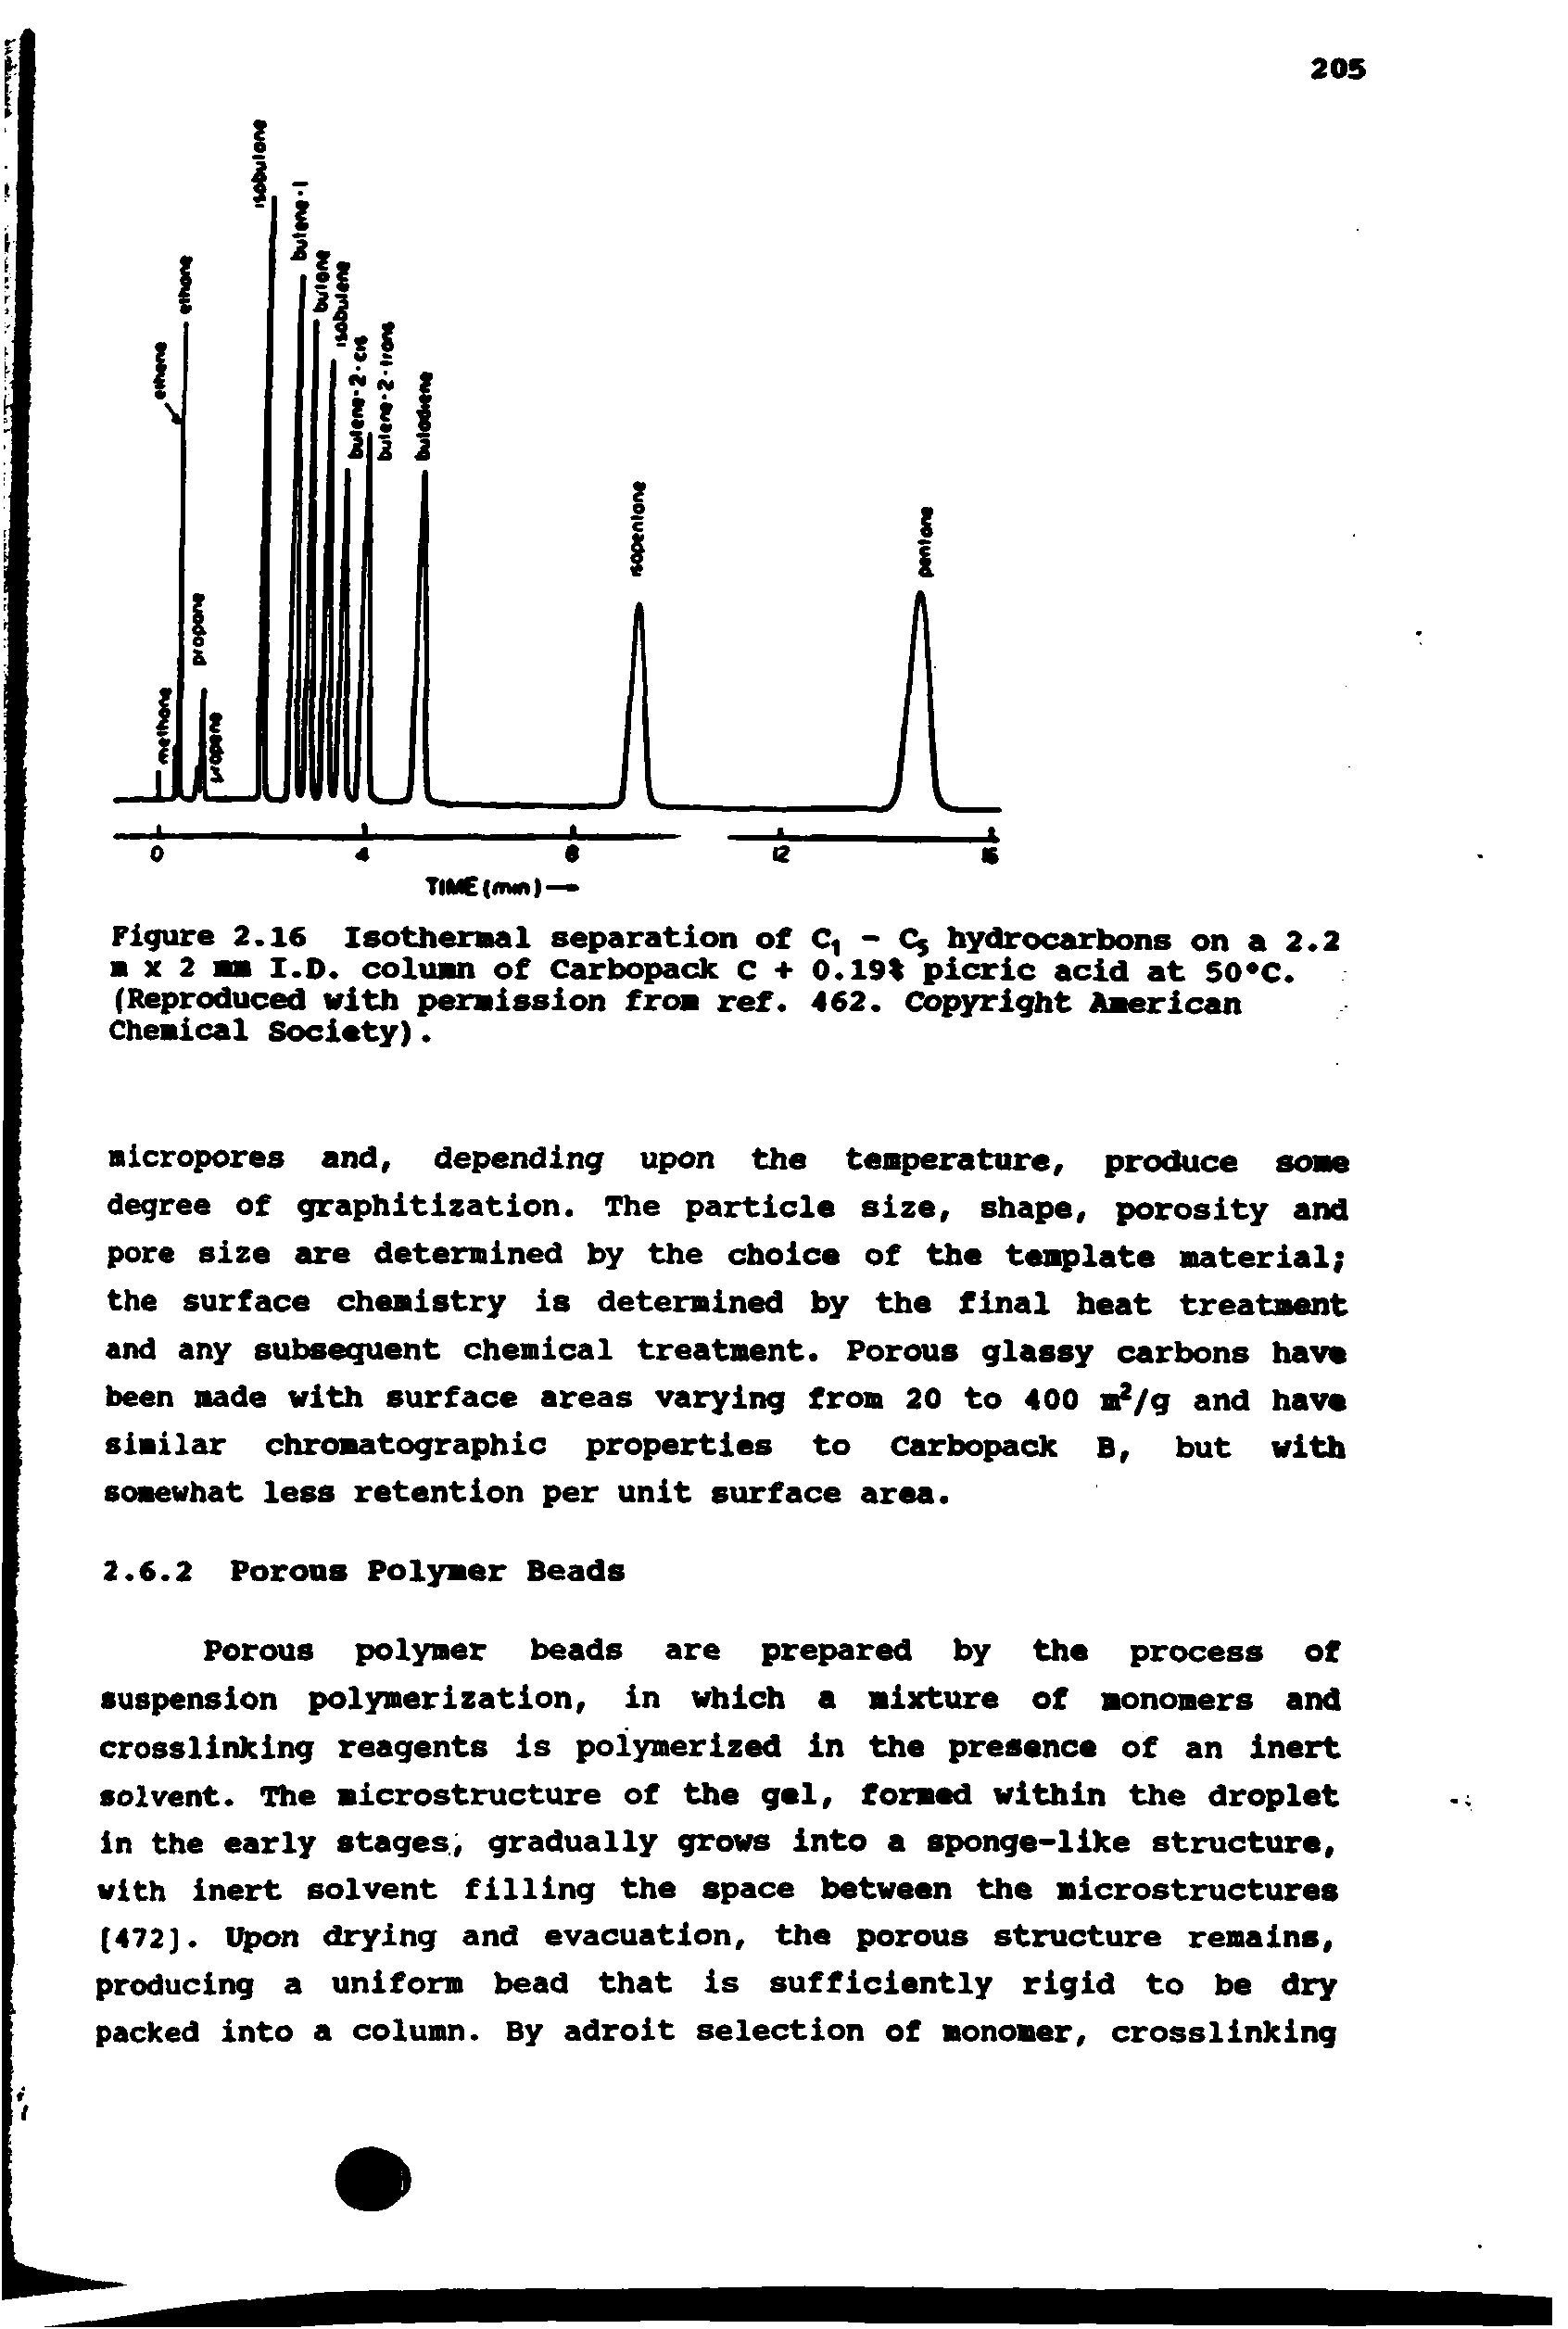 Figure 2.16 Isotheraal separation of - Cj hydrocarbons on a 2.2 B X 2 I.O. colunn of C u bopack c 0.19% picric acid at 50 C. (Reproduced with pemission fron ref. 462. Copyright Aaerican Chenical Society).